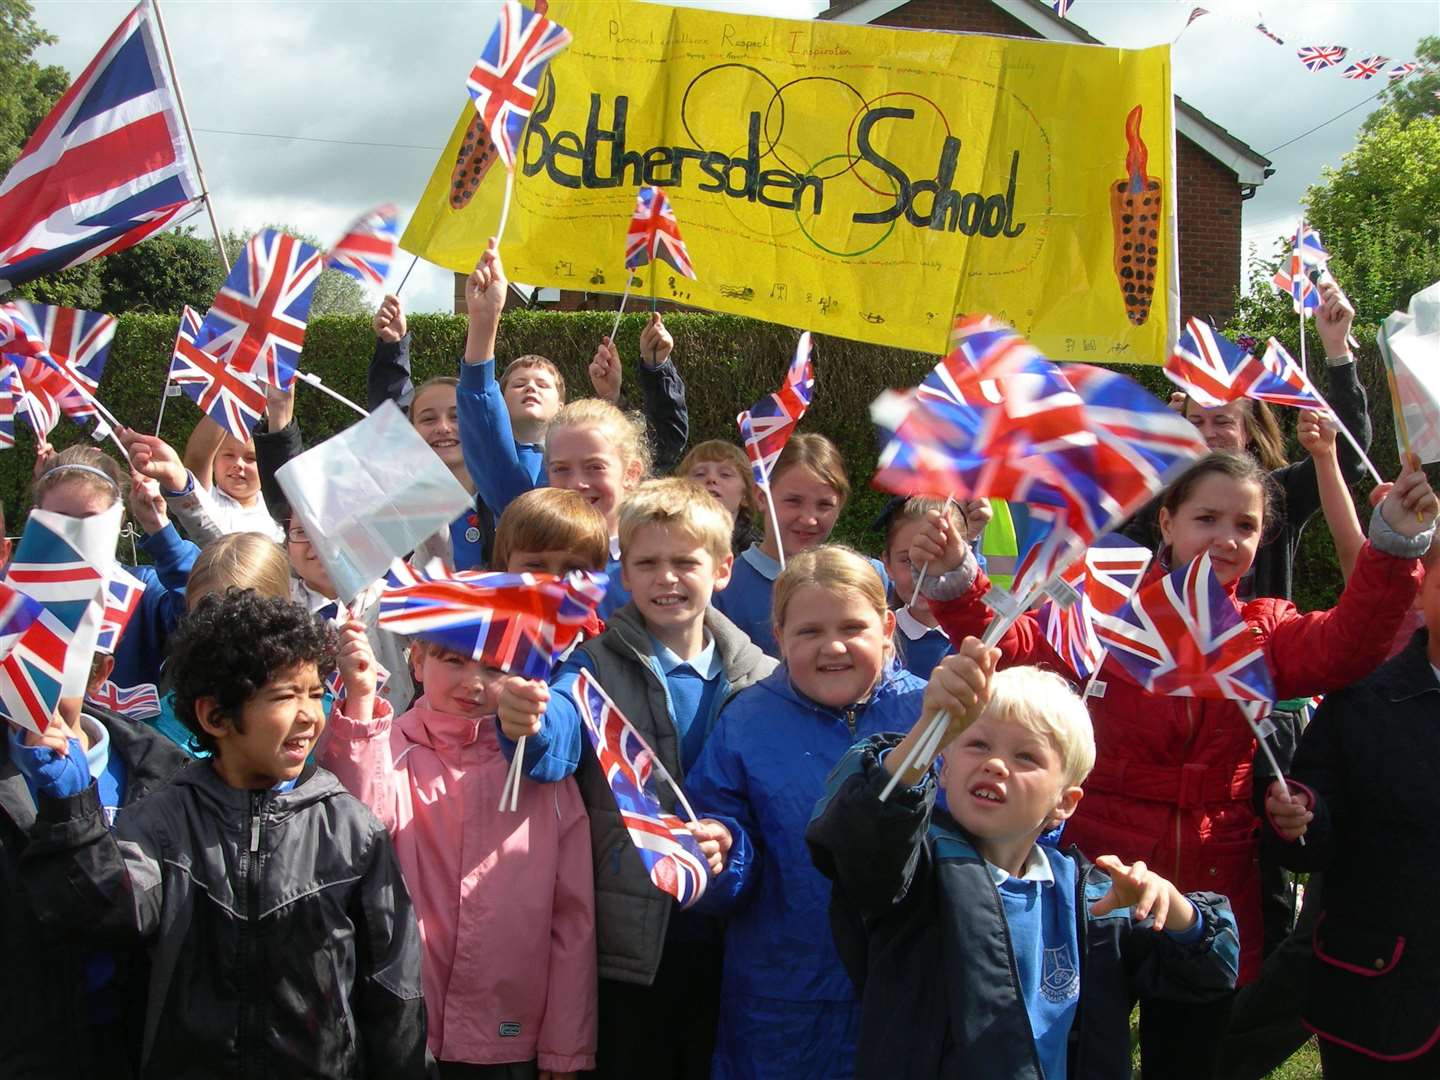 Bethersden Primary School pupils in Hamstreet for the Olympic torch relay